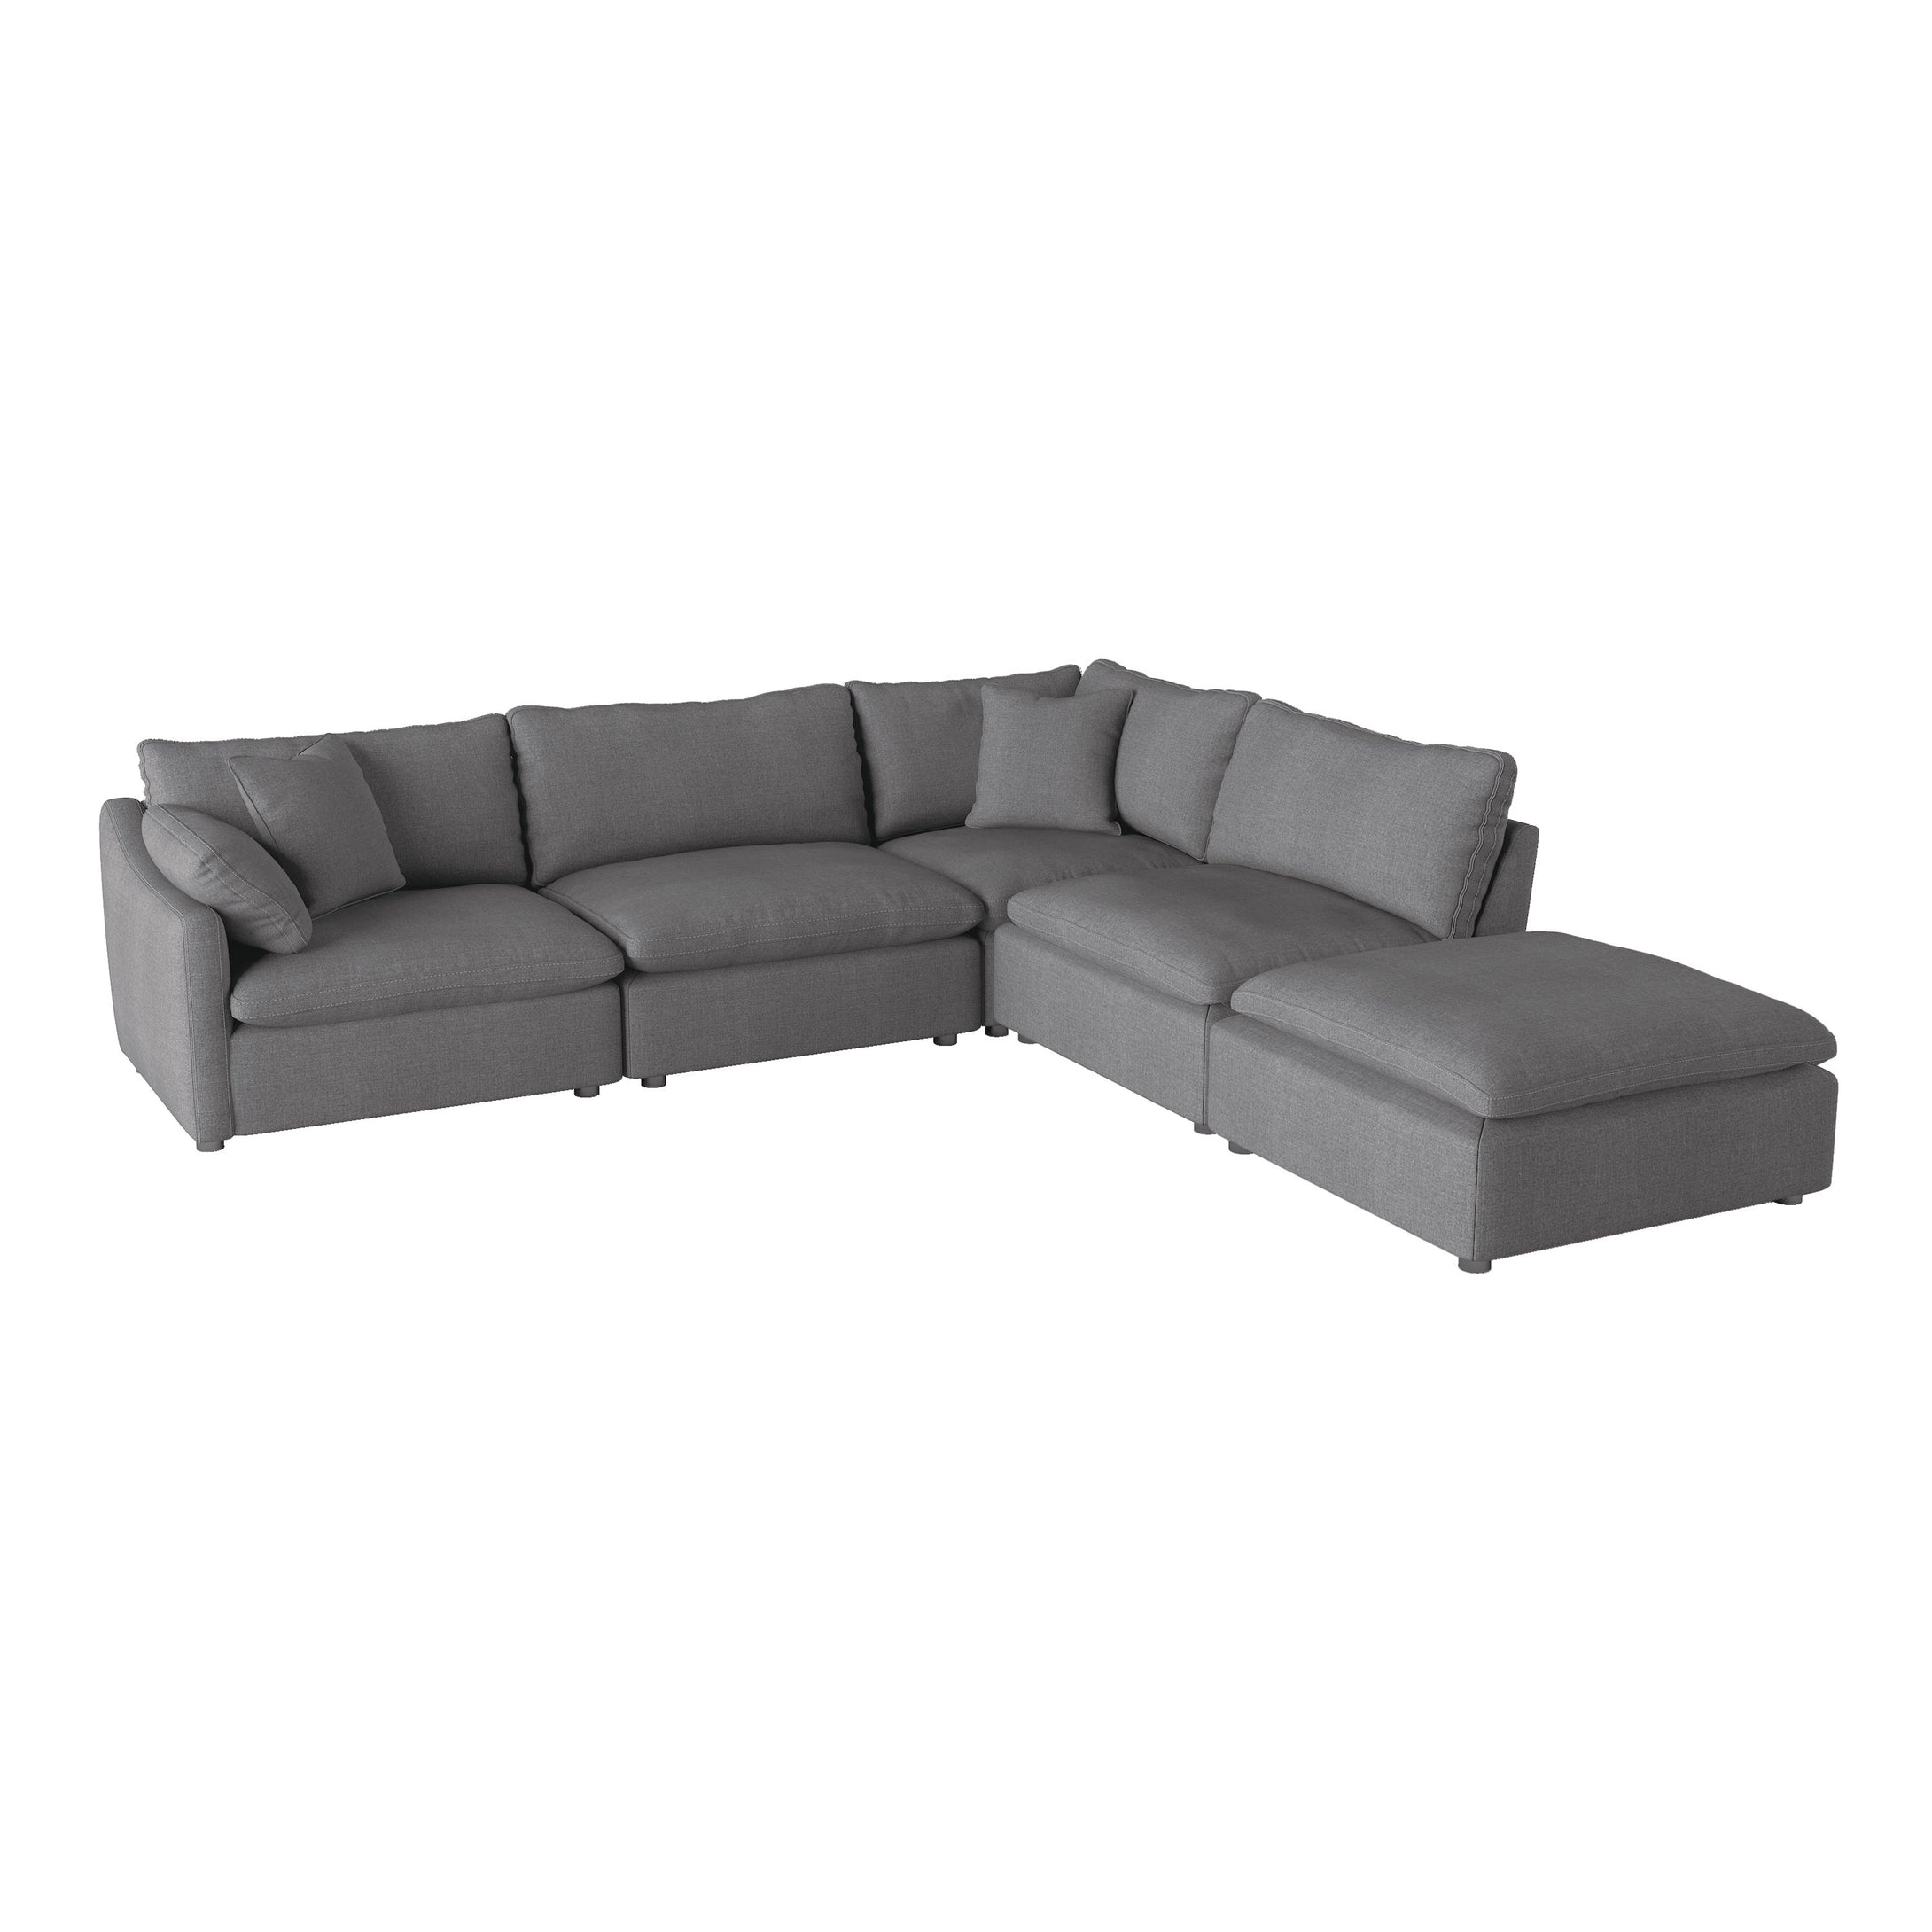 9544GY*5OT 5-Piece Modular Sectional with Ottoman